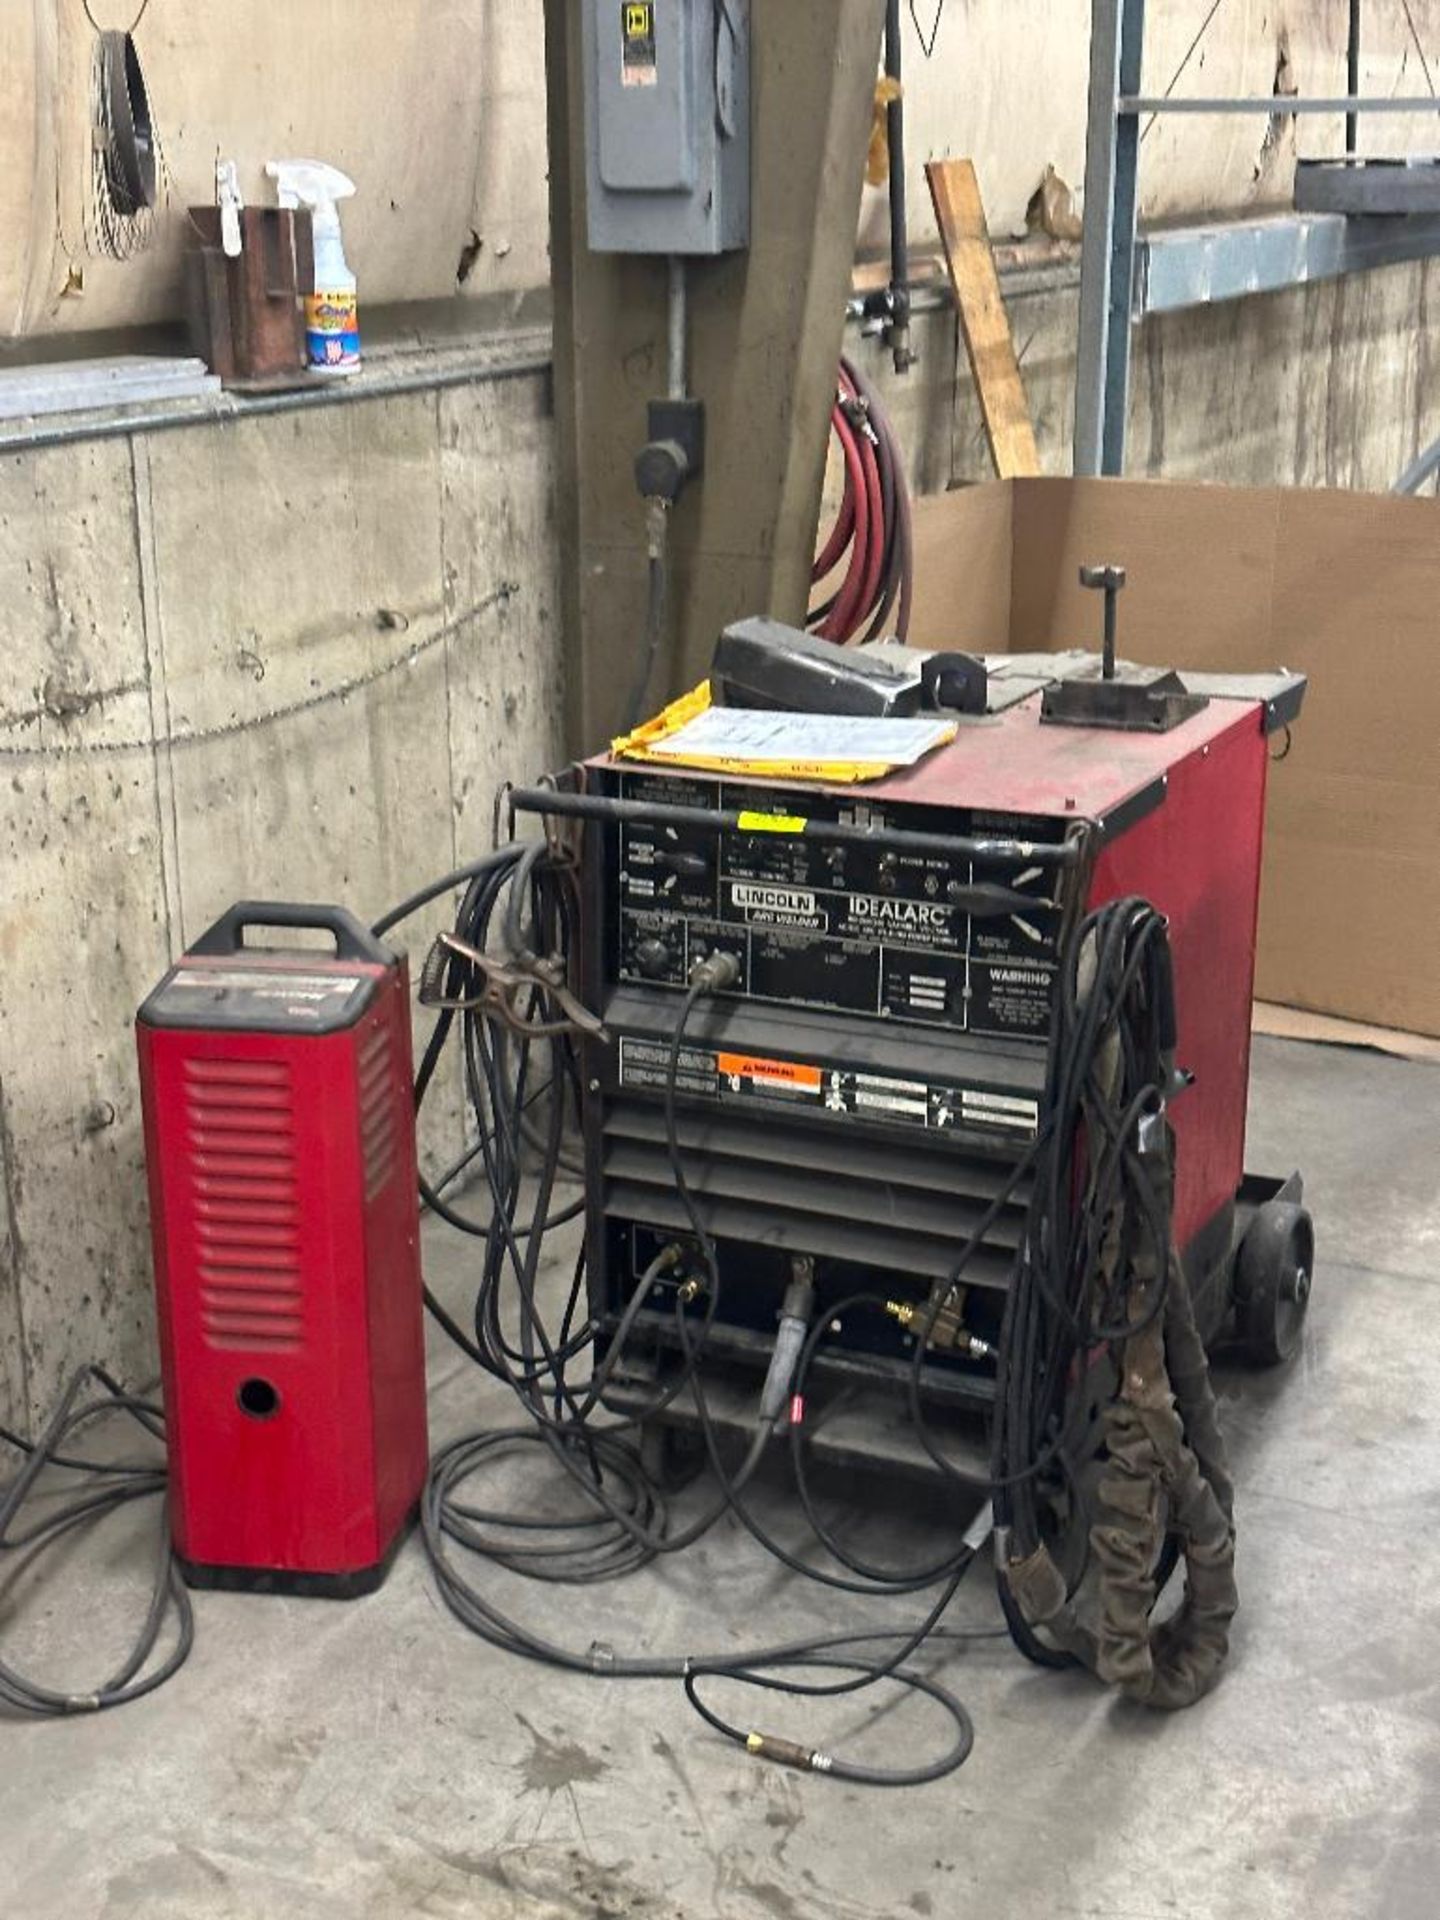 LINCOLN IDEALARC VARIABLE VOLTAGE ARC WELDER WITH LEADS AND ADDITIONAL FUEL TANK - Image 10 of 10